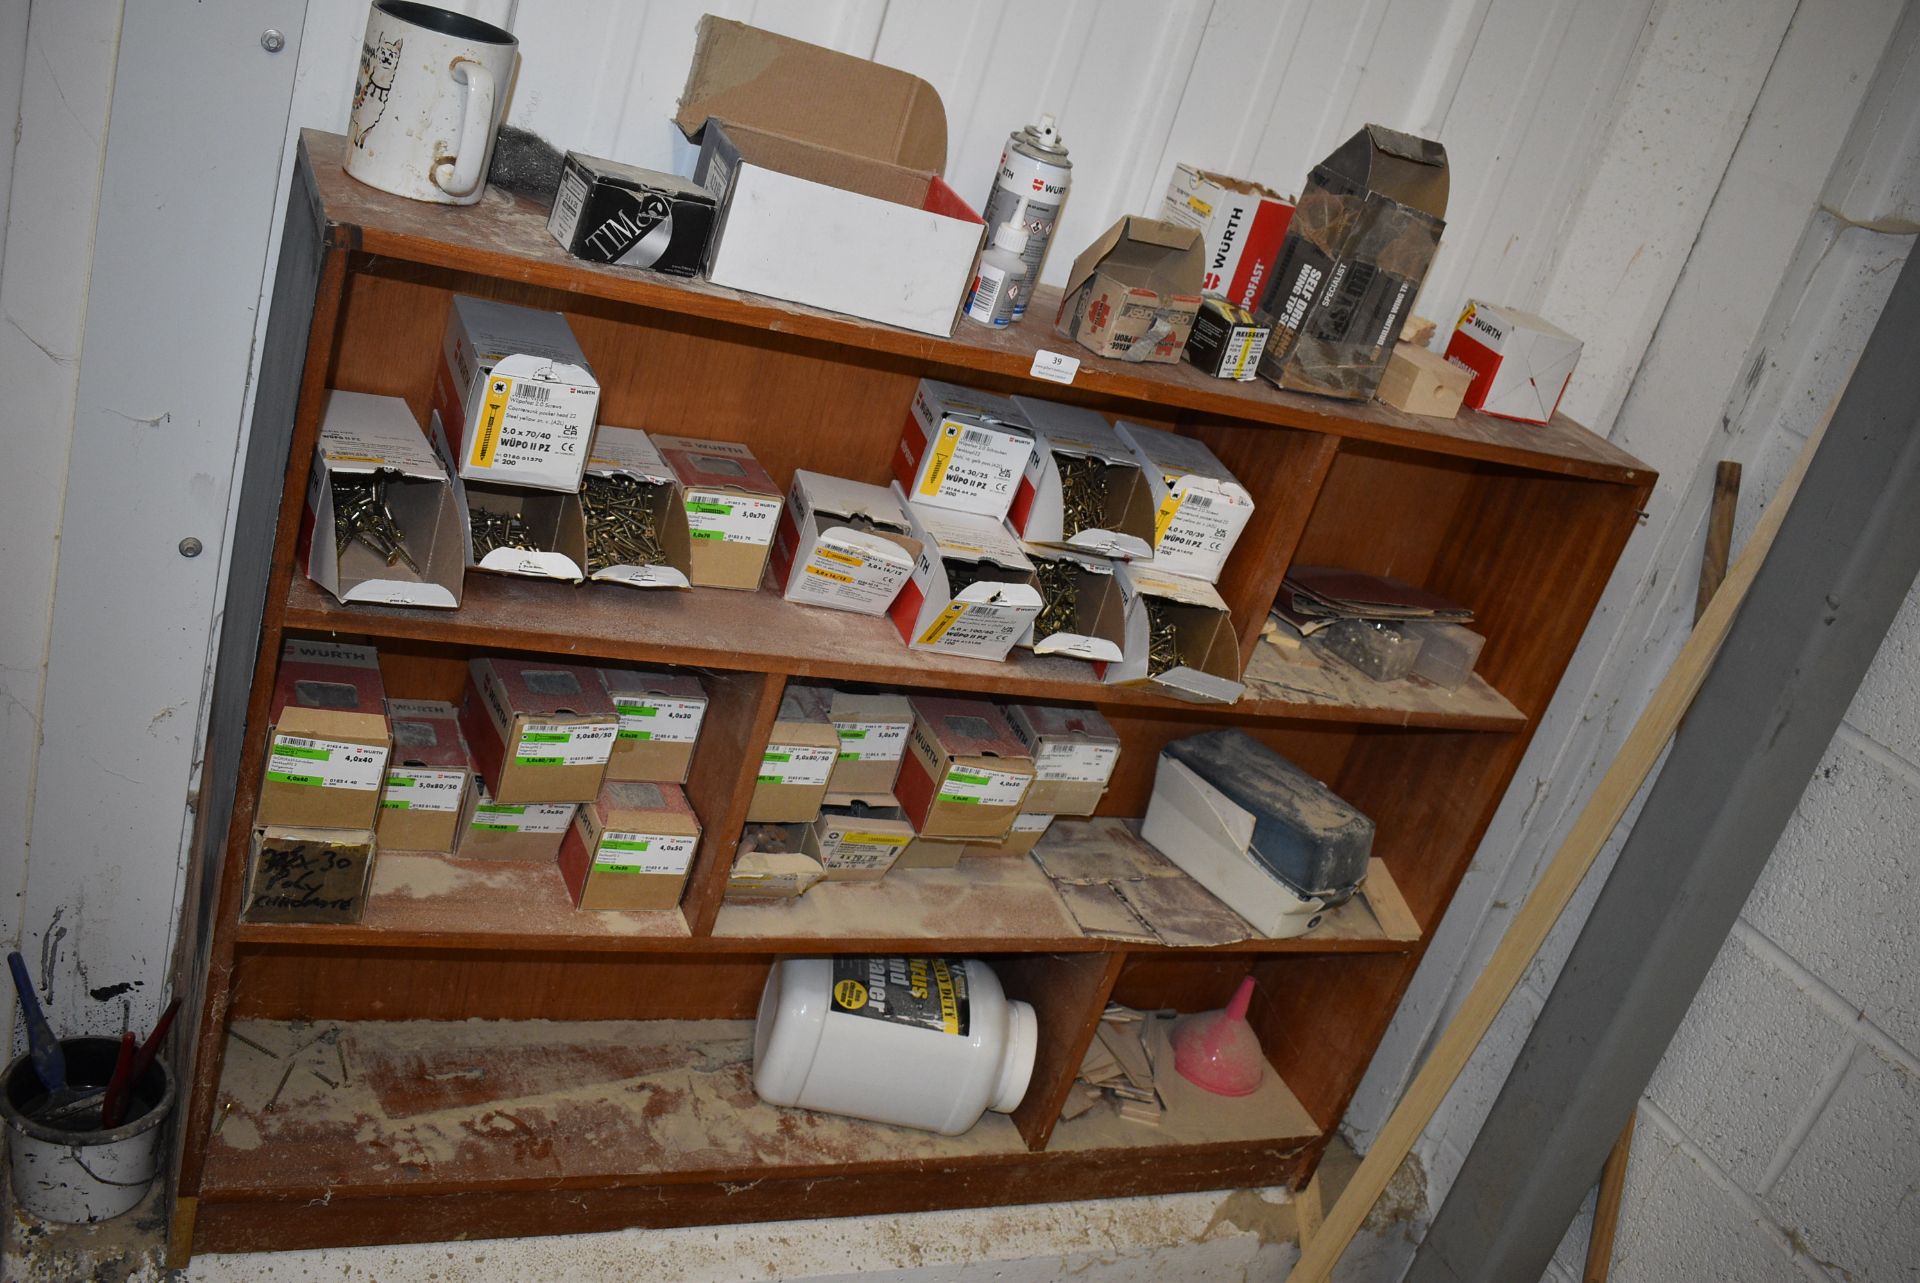 *Contents of Open Fronted Shelving Unit Including Various Wood Screws, Plugs, etc.